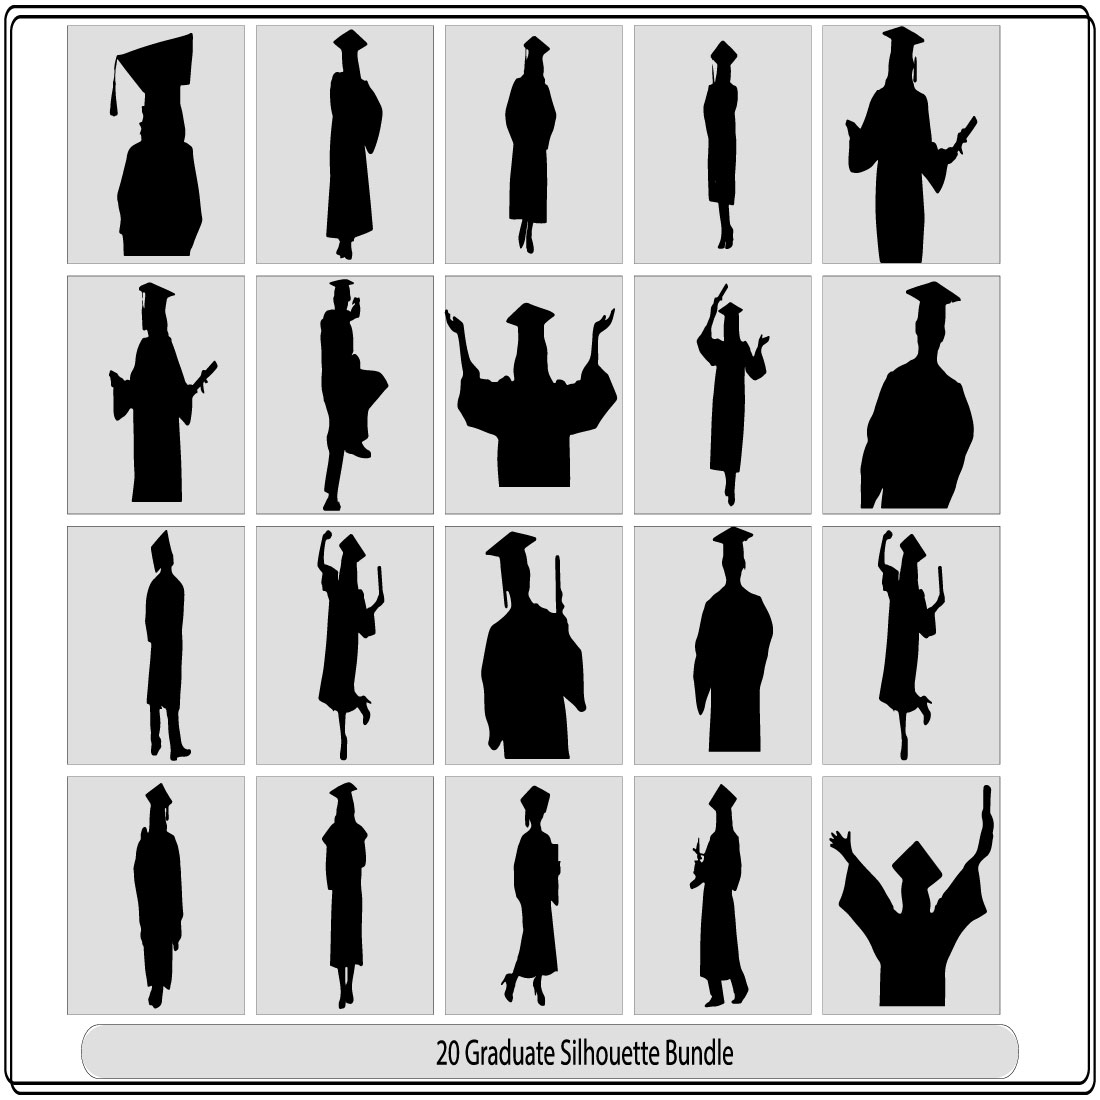 Graduates Celebrating silhouettes in different poses,Happy graduate students with graduating caps and diploma or certificates, preview image.